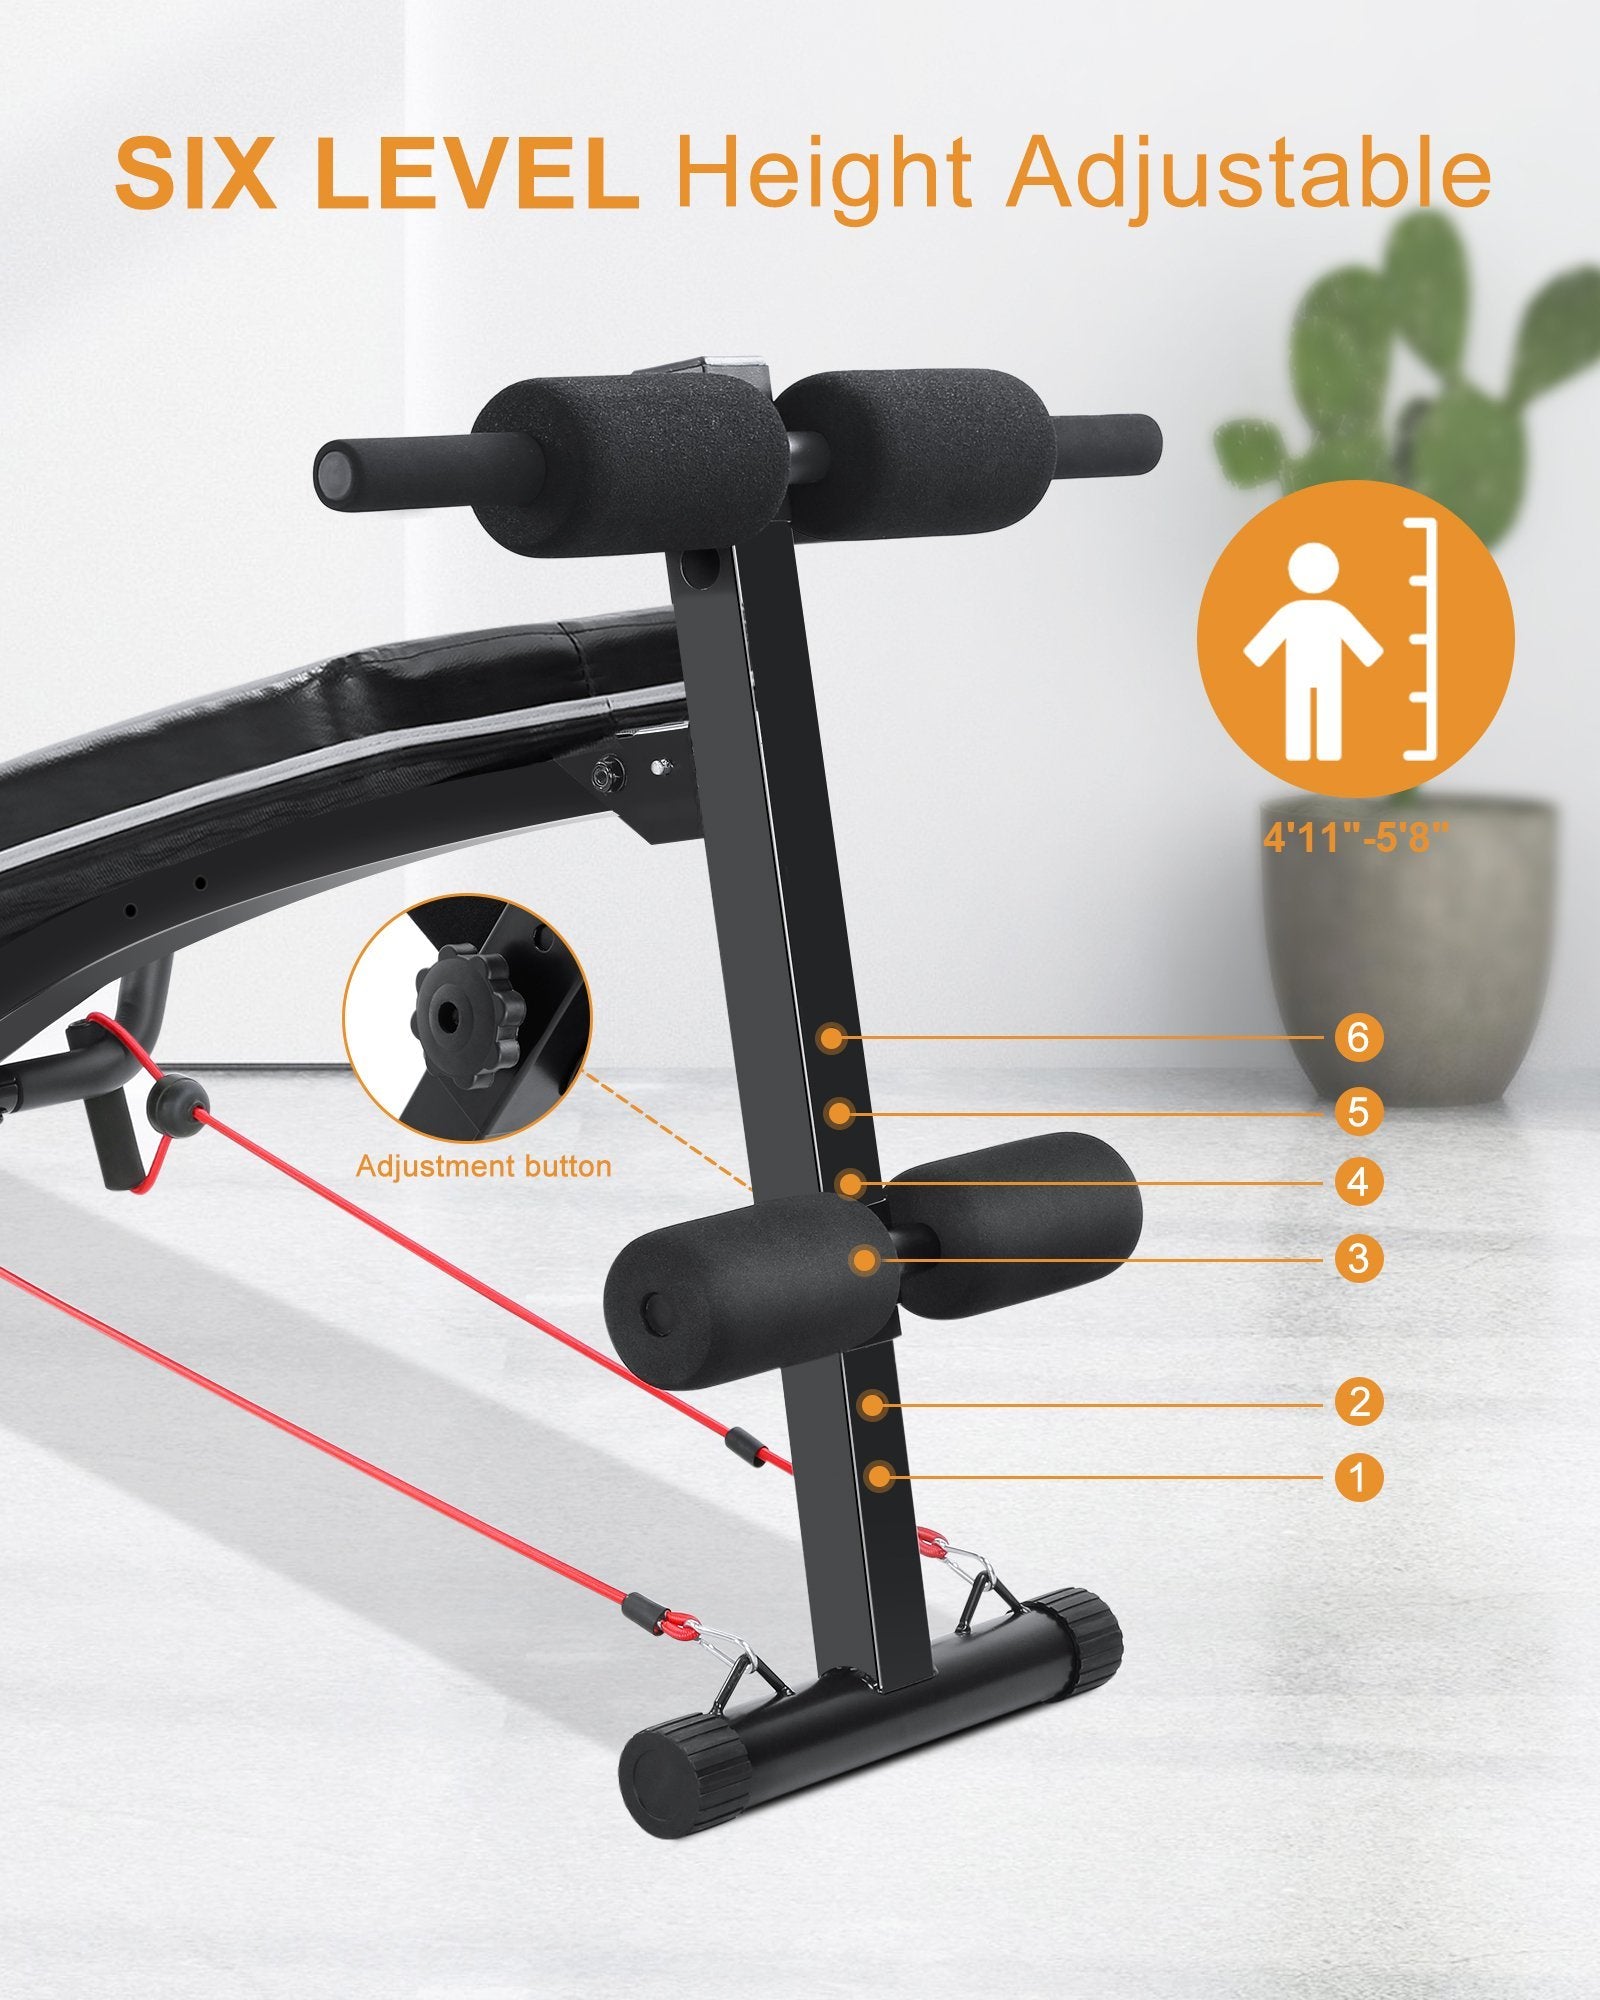 Load image into Gallery viewer, Sit Up Ab Bench Adjustable|MaxKare Foldable Slant Board for Sit-up Abdominal Exercise|Utility Workout Equipment Bench for Home Gym|Decline Recline Situp Benches - NAIPO
